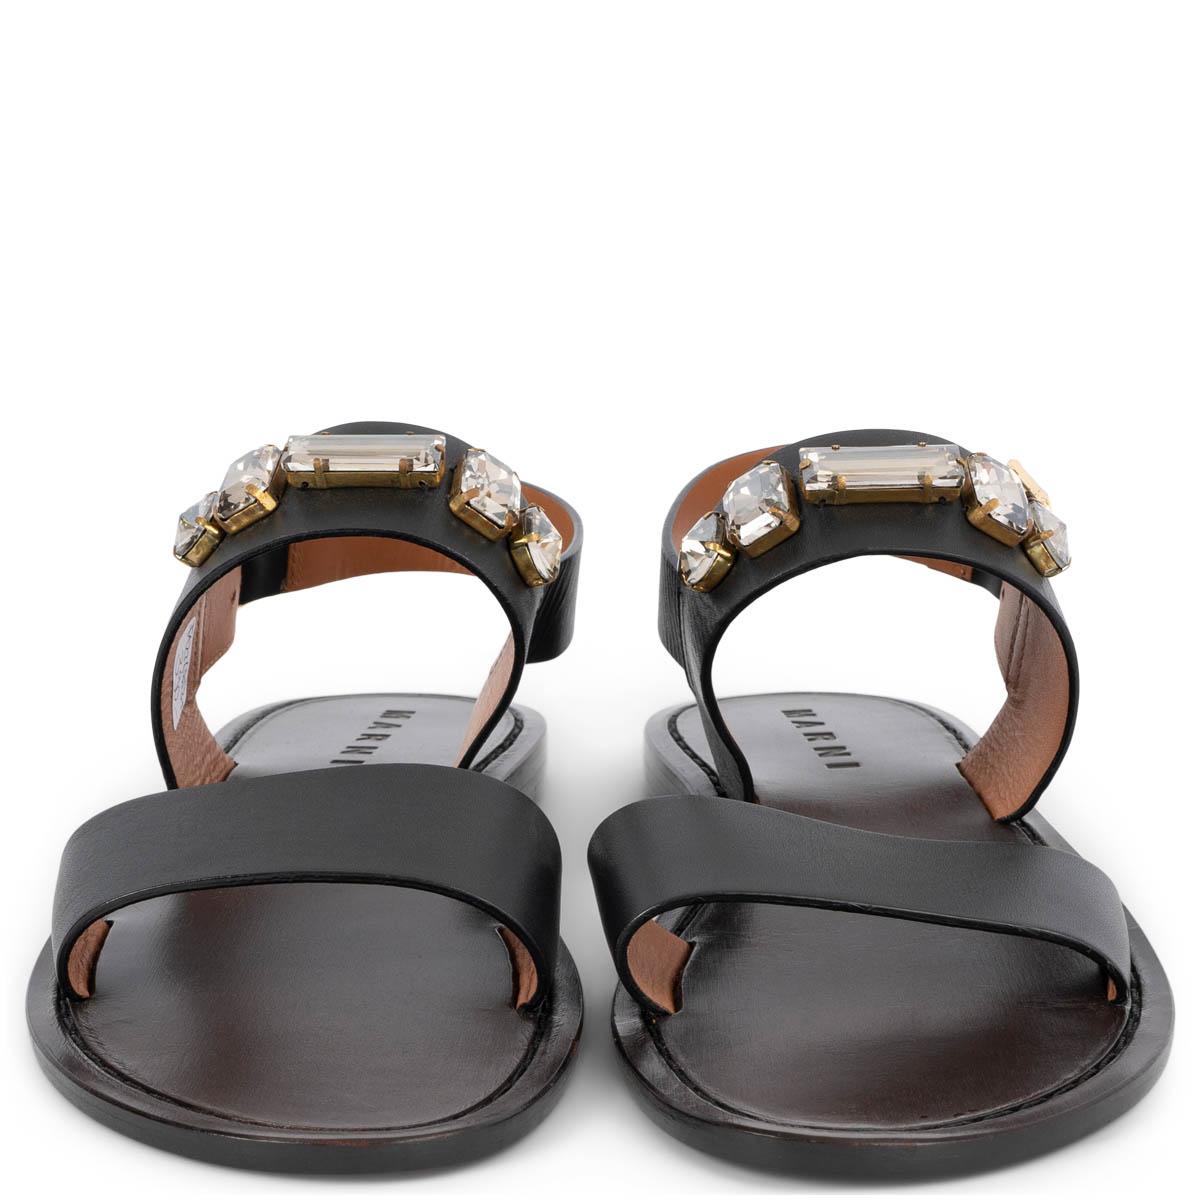 100% authentic Marni flats sandals in black & espresso brown leather embellished with clear crystals. Brand new. 

Measurements
Imprinted Size	39
Shoe Size	39
Inside Sole	26cm (10.1in)
Width	7.5cm (2.9in)
Hardware	Gold-Tone

All our listings include